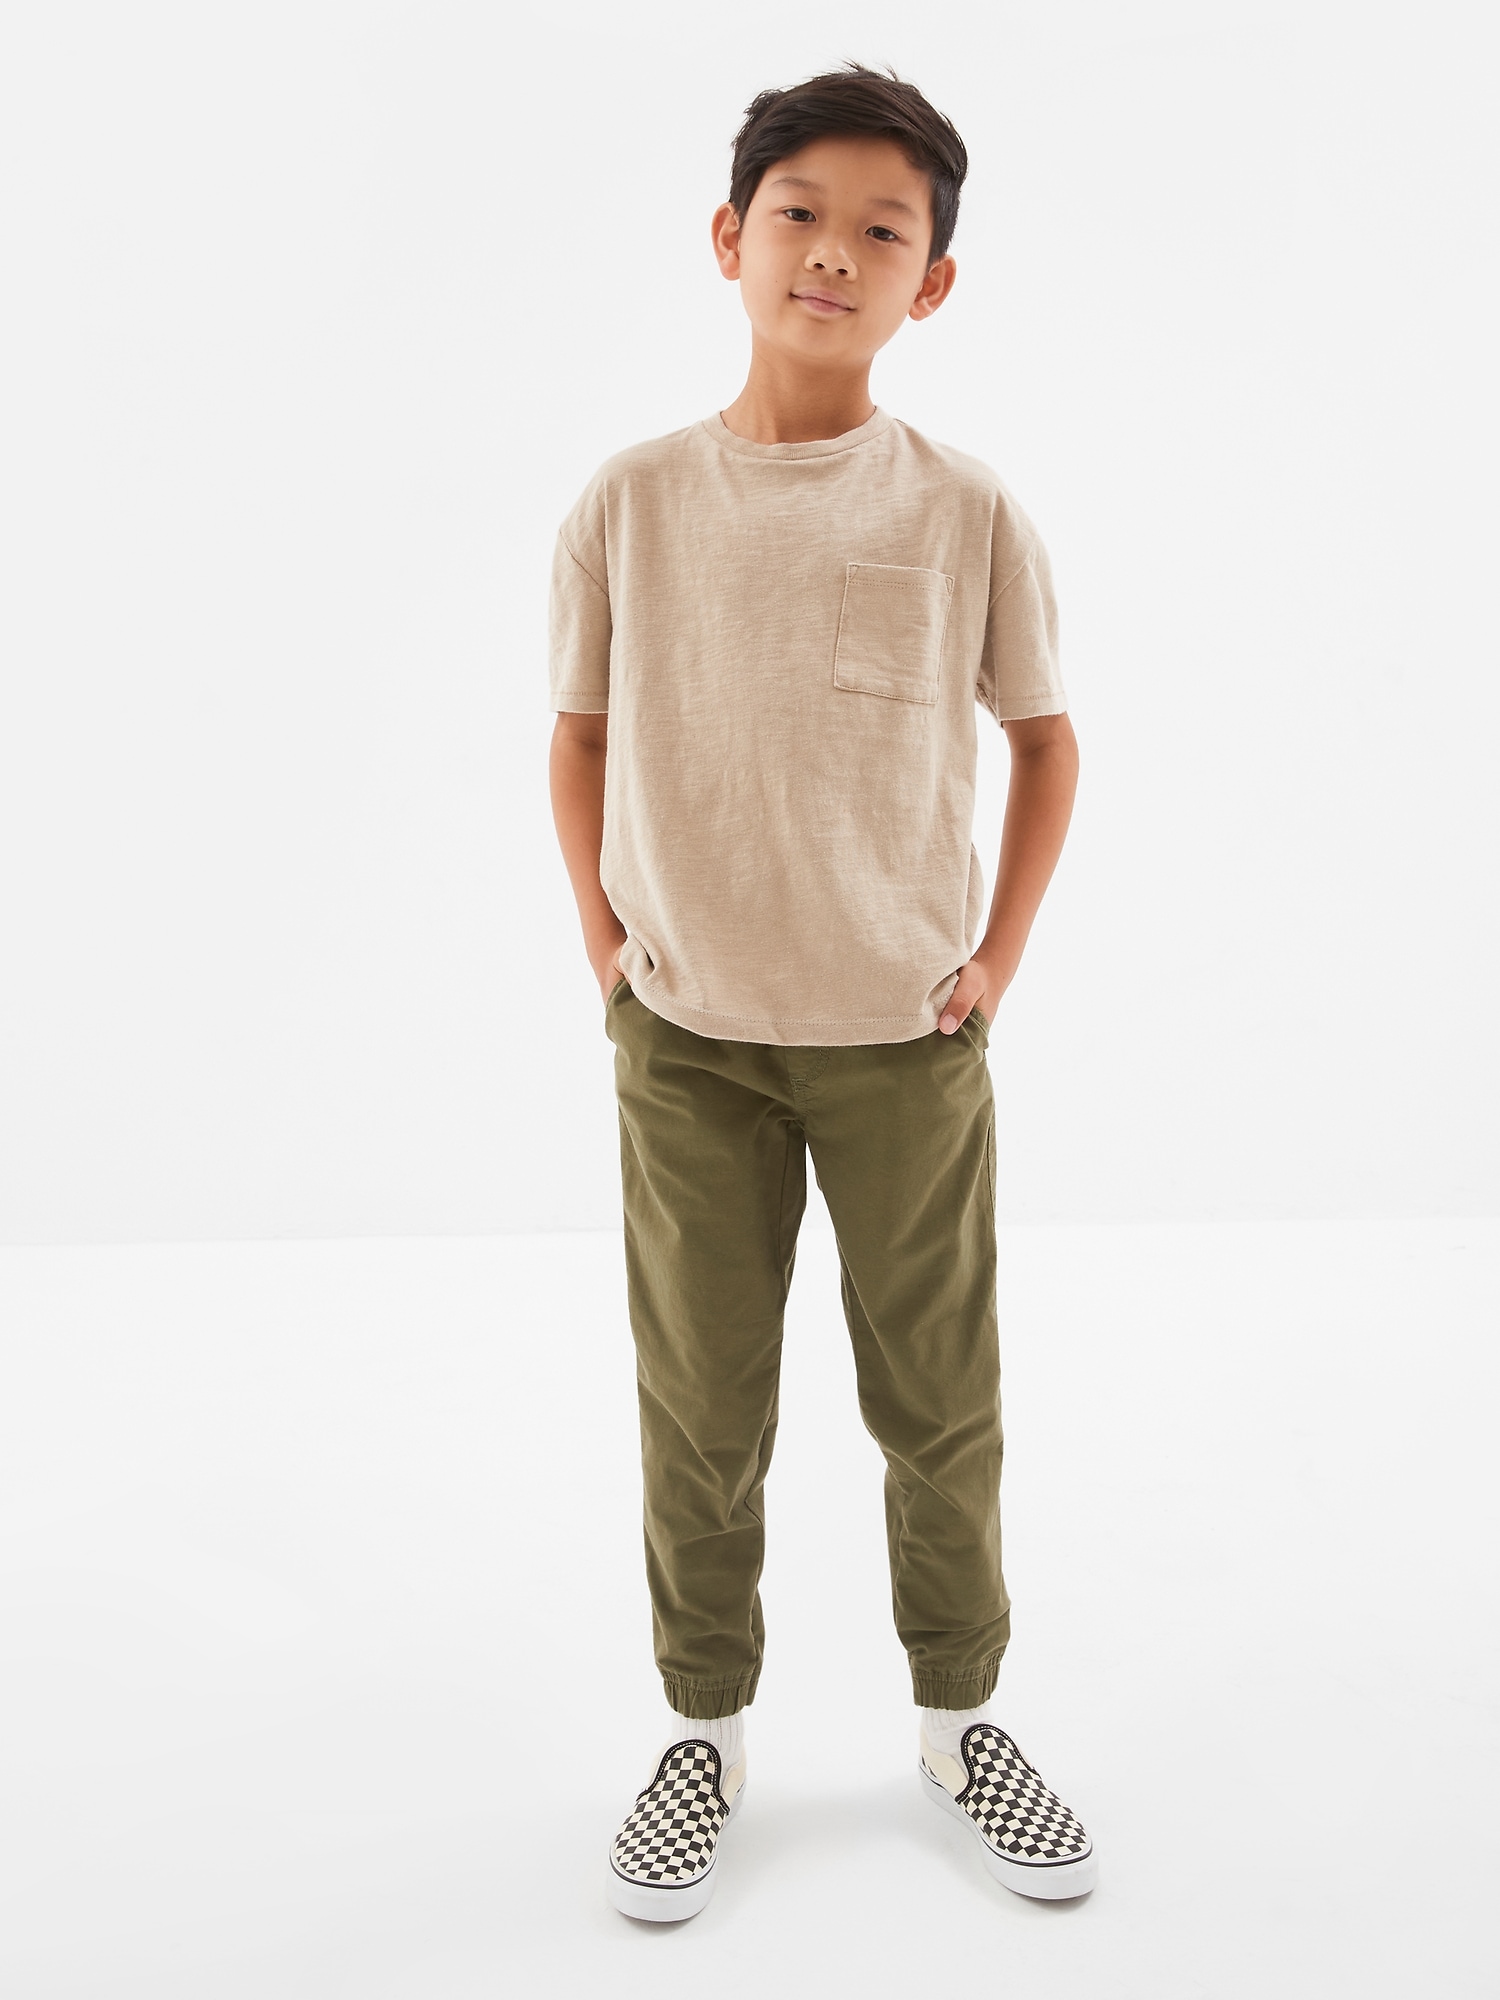 Kids Everyday Joggers with Washwell | Gap Factory